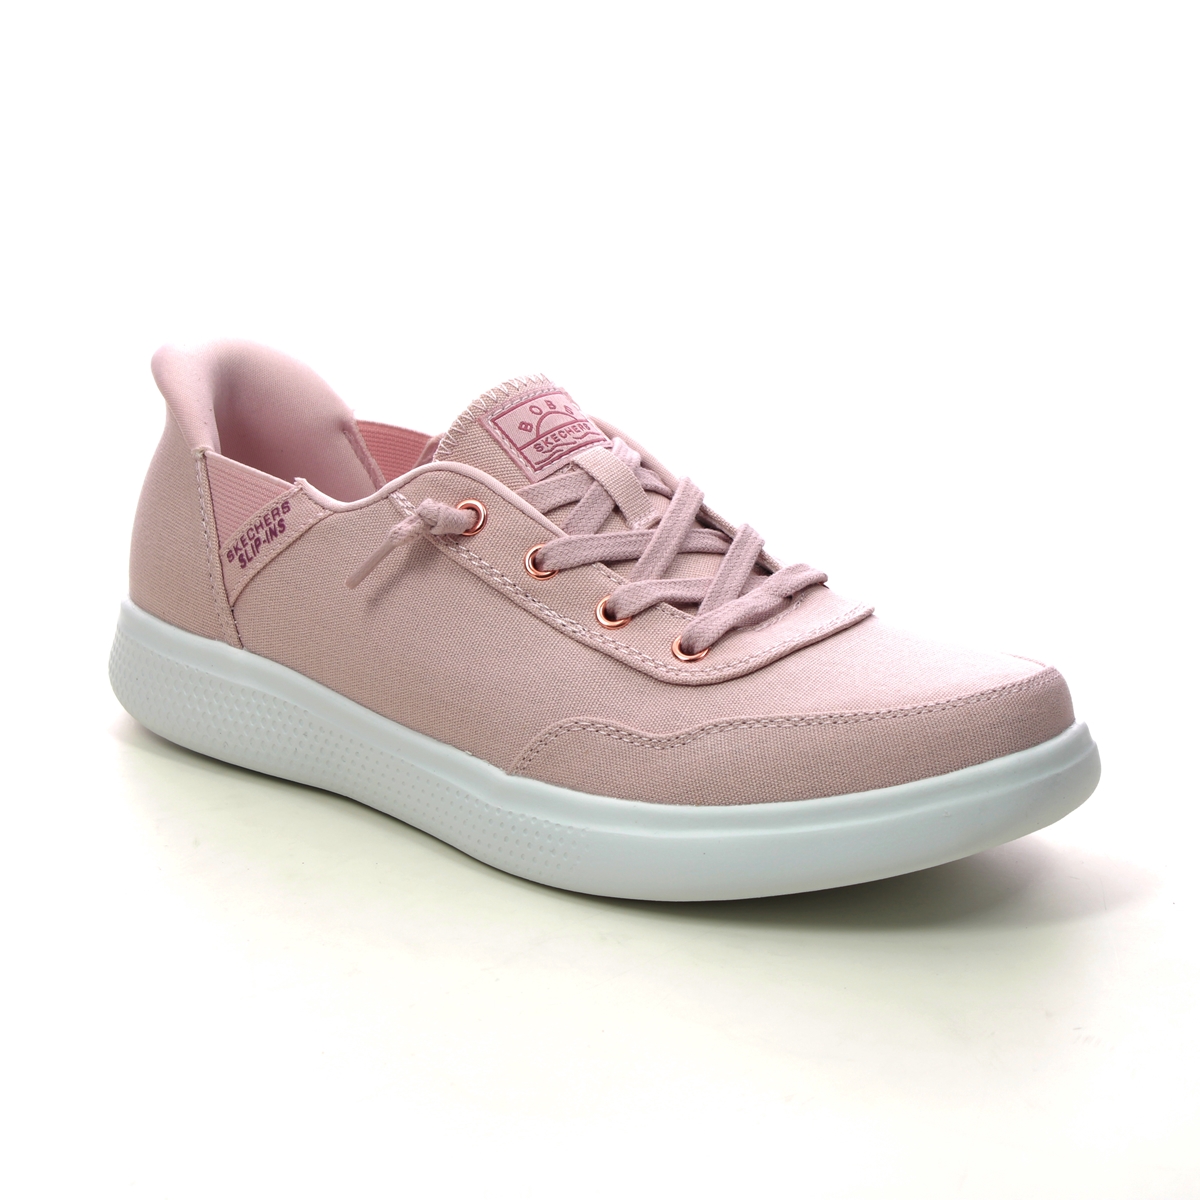 Skechers Bobs Slip Ins BLSH Blush Pink Womens trainers 114815 in a Plain Textile in Size 5